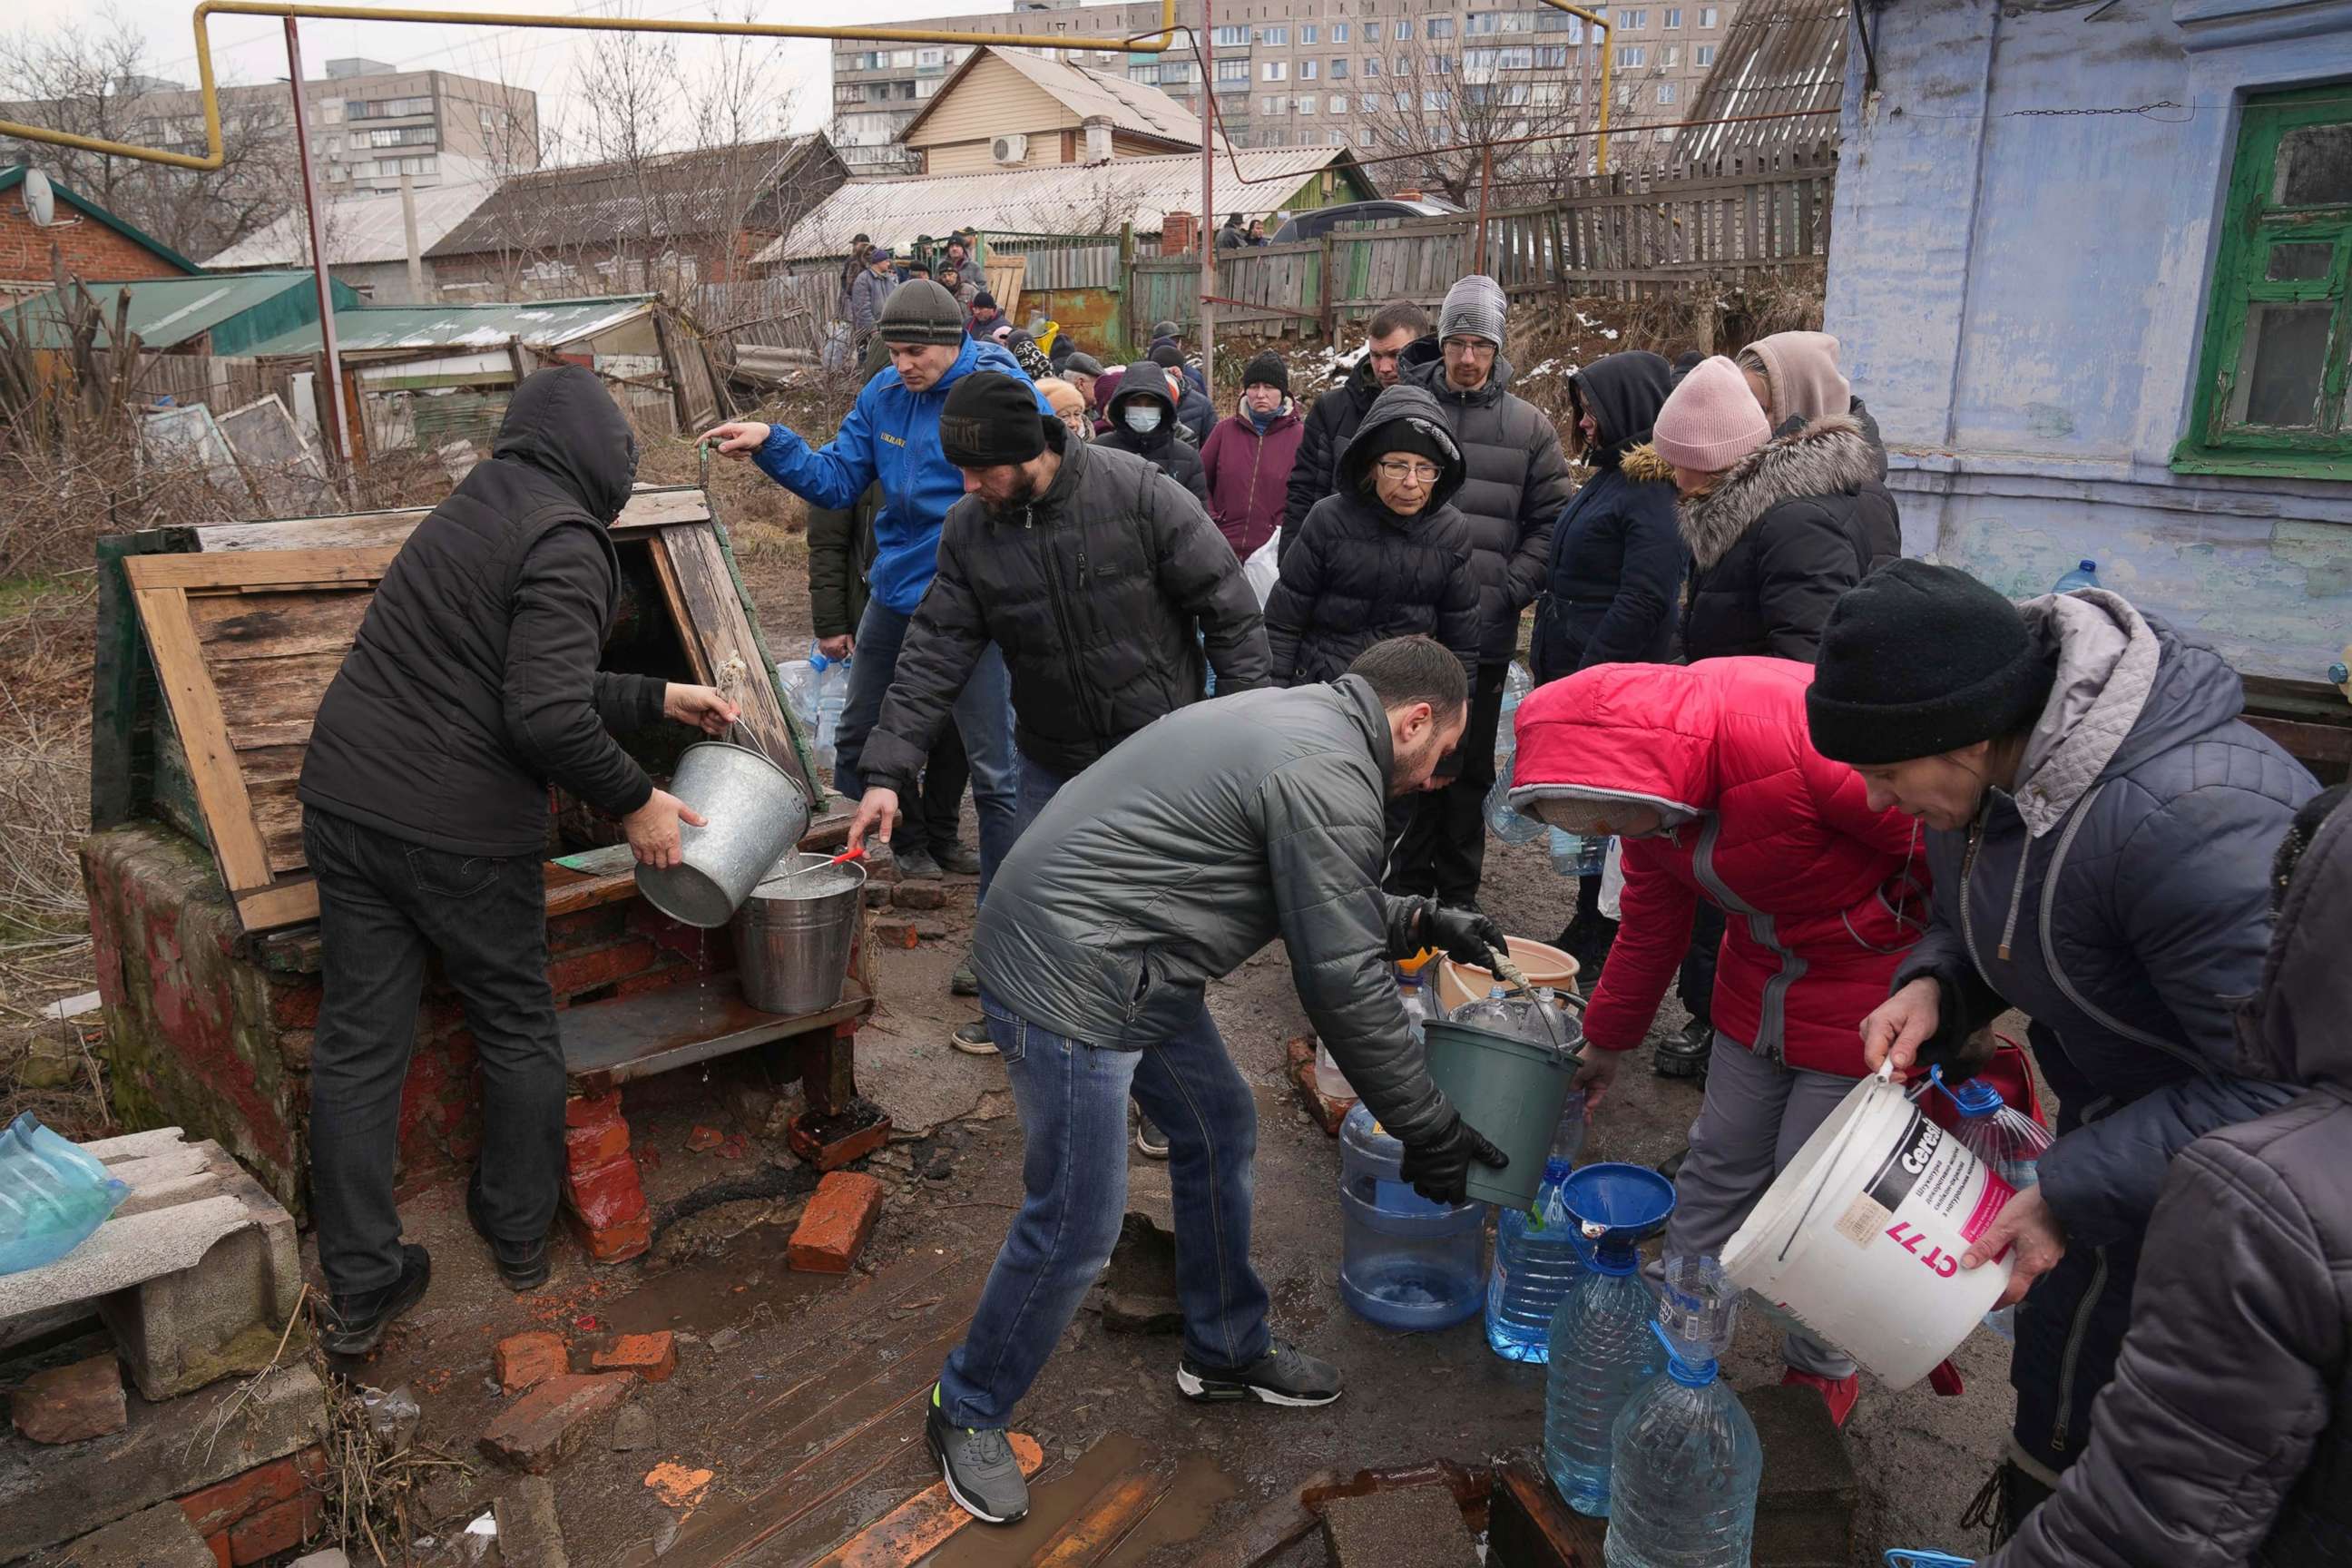 PHOTO: People line up to get water at the well in outskirts of Mariupol, Ukraine, March 9, 2022.